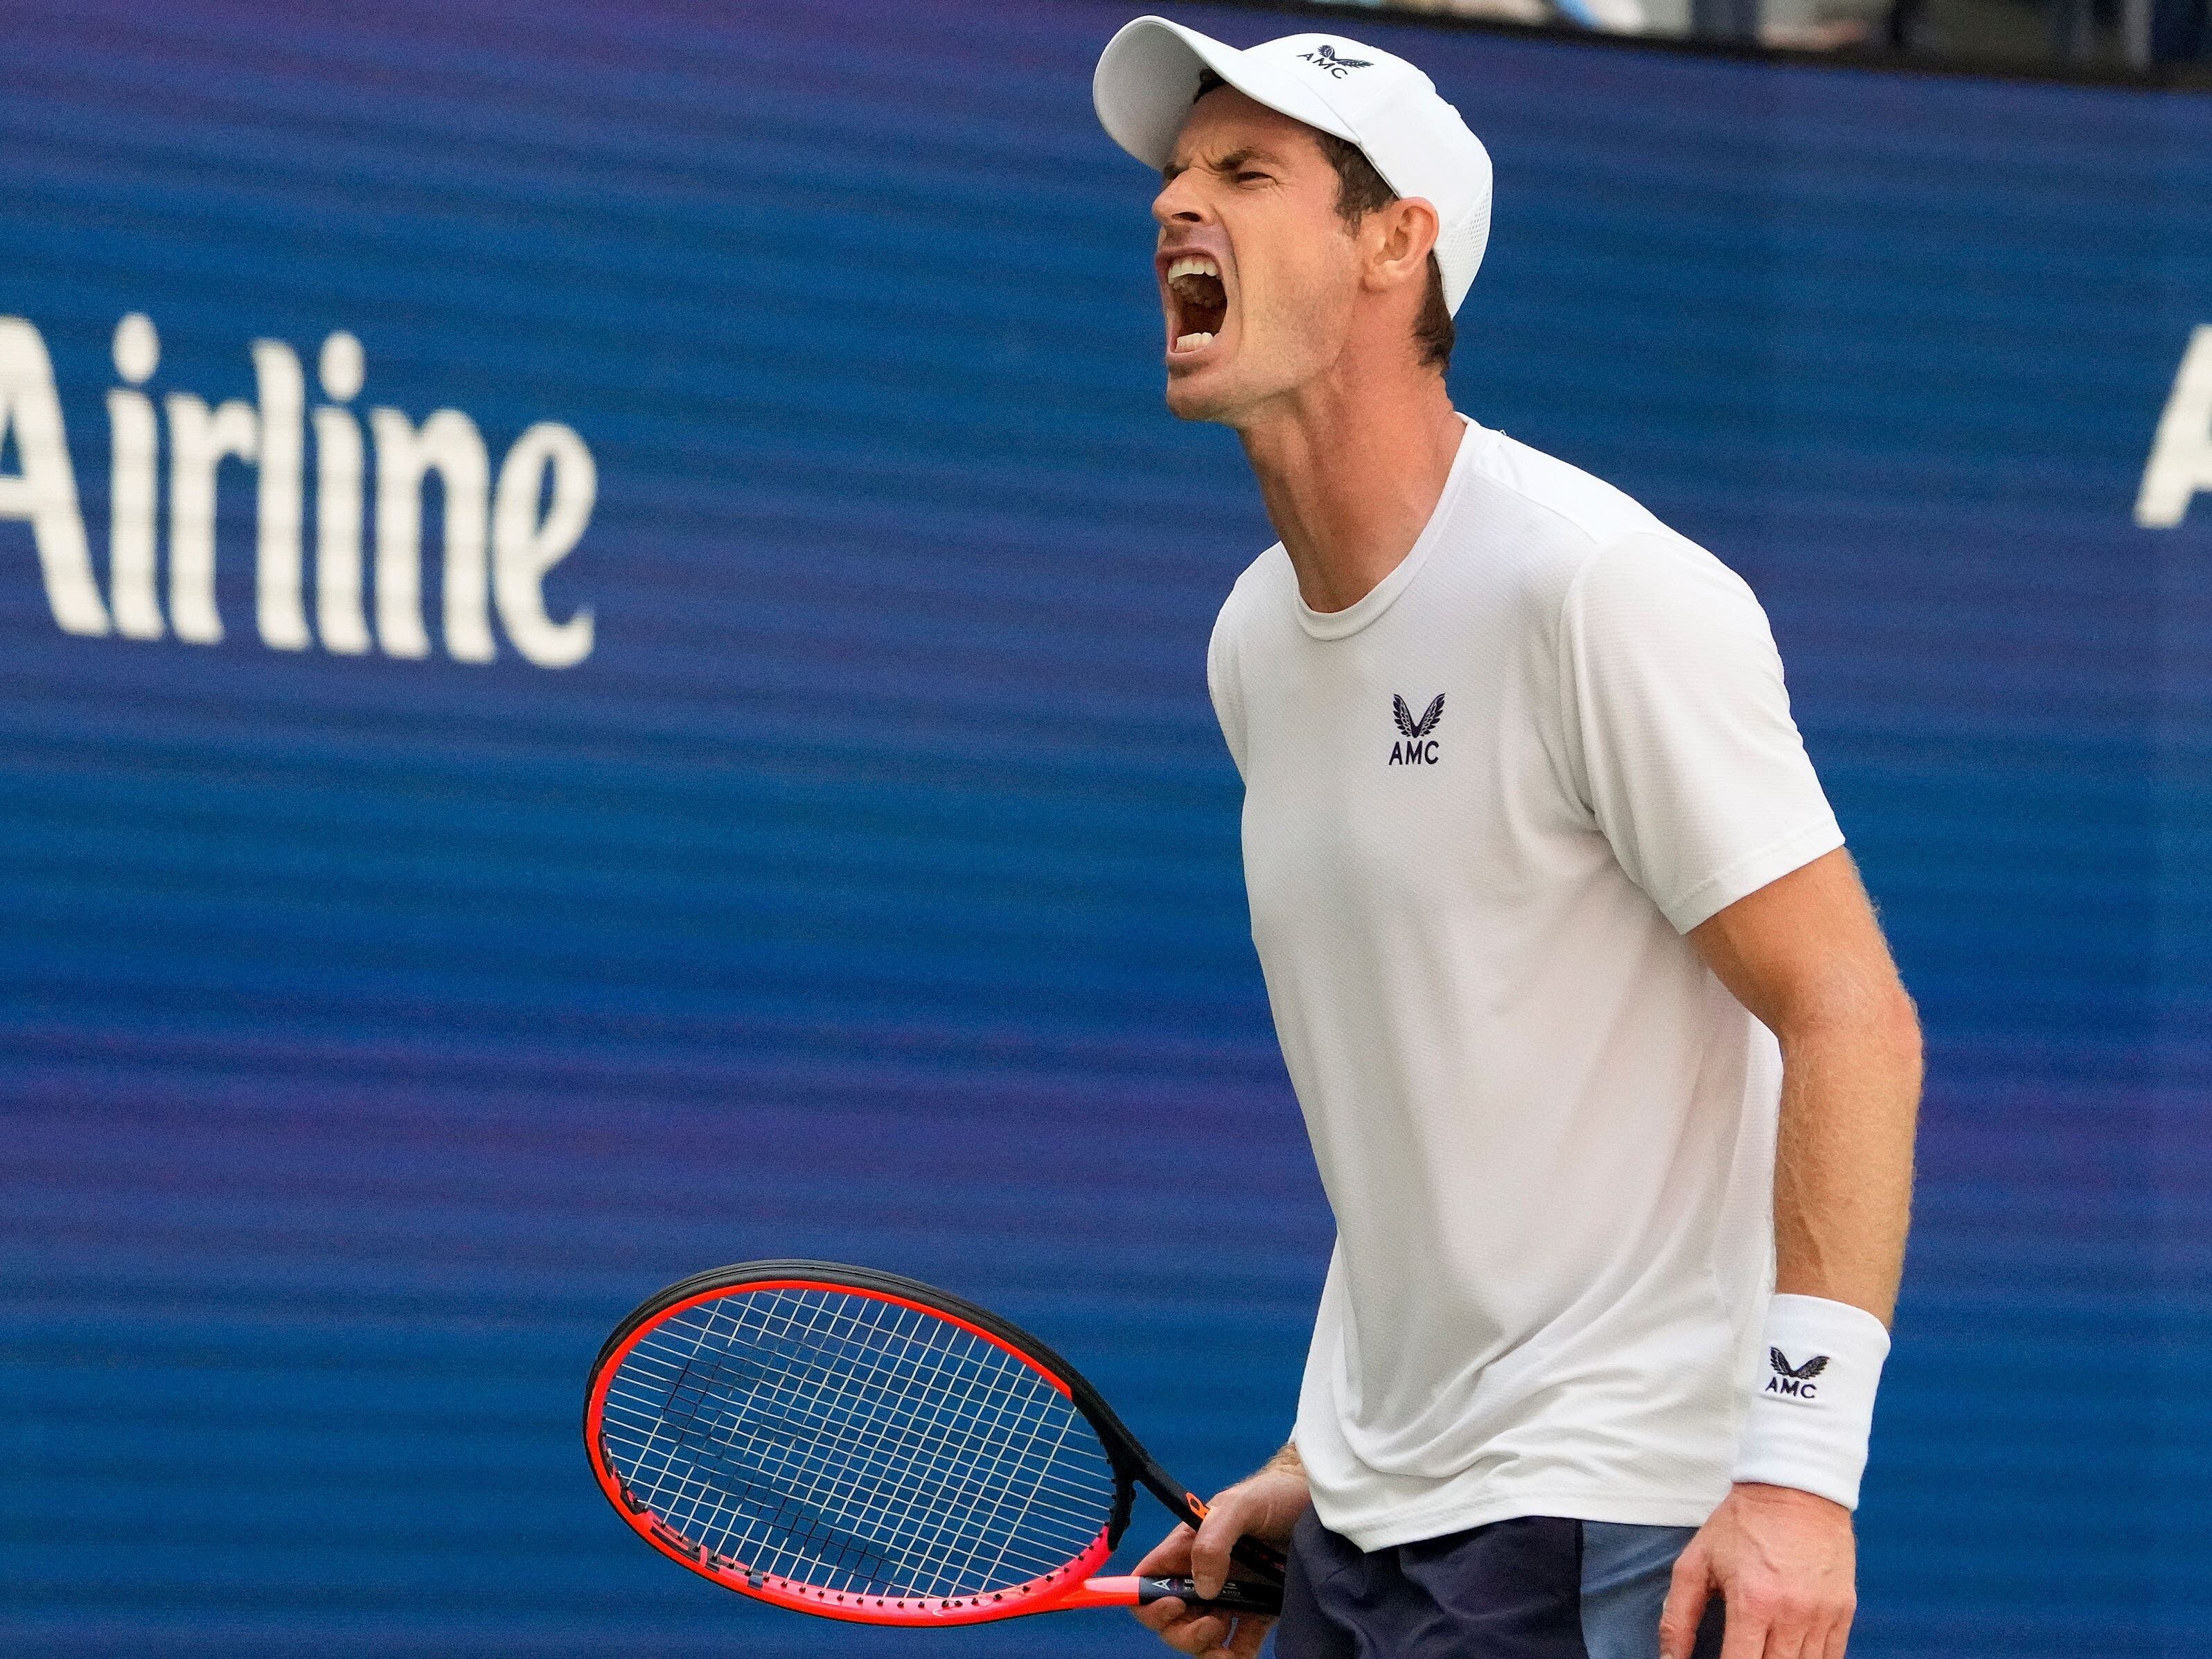 Andy Murray knocked out of US Open by Grigor Dimitrov in straight sets